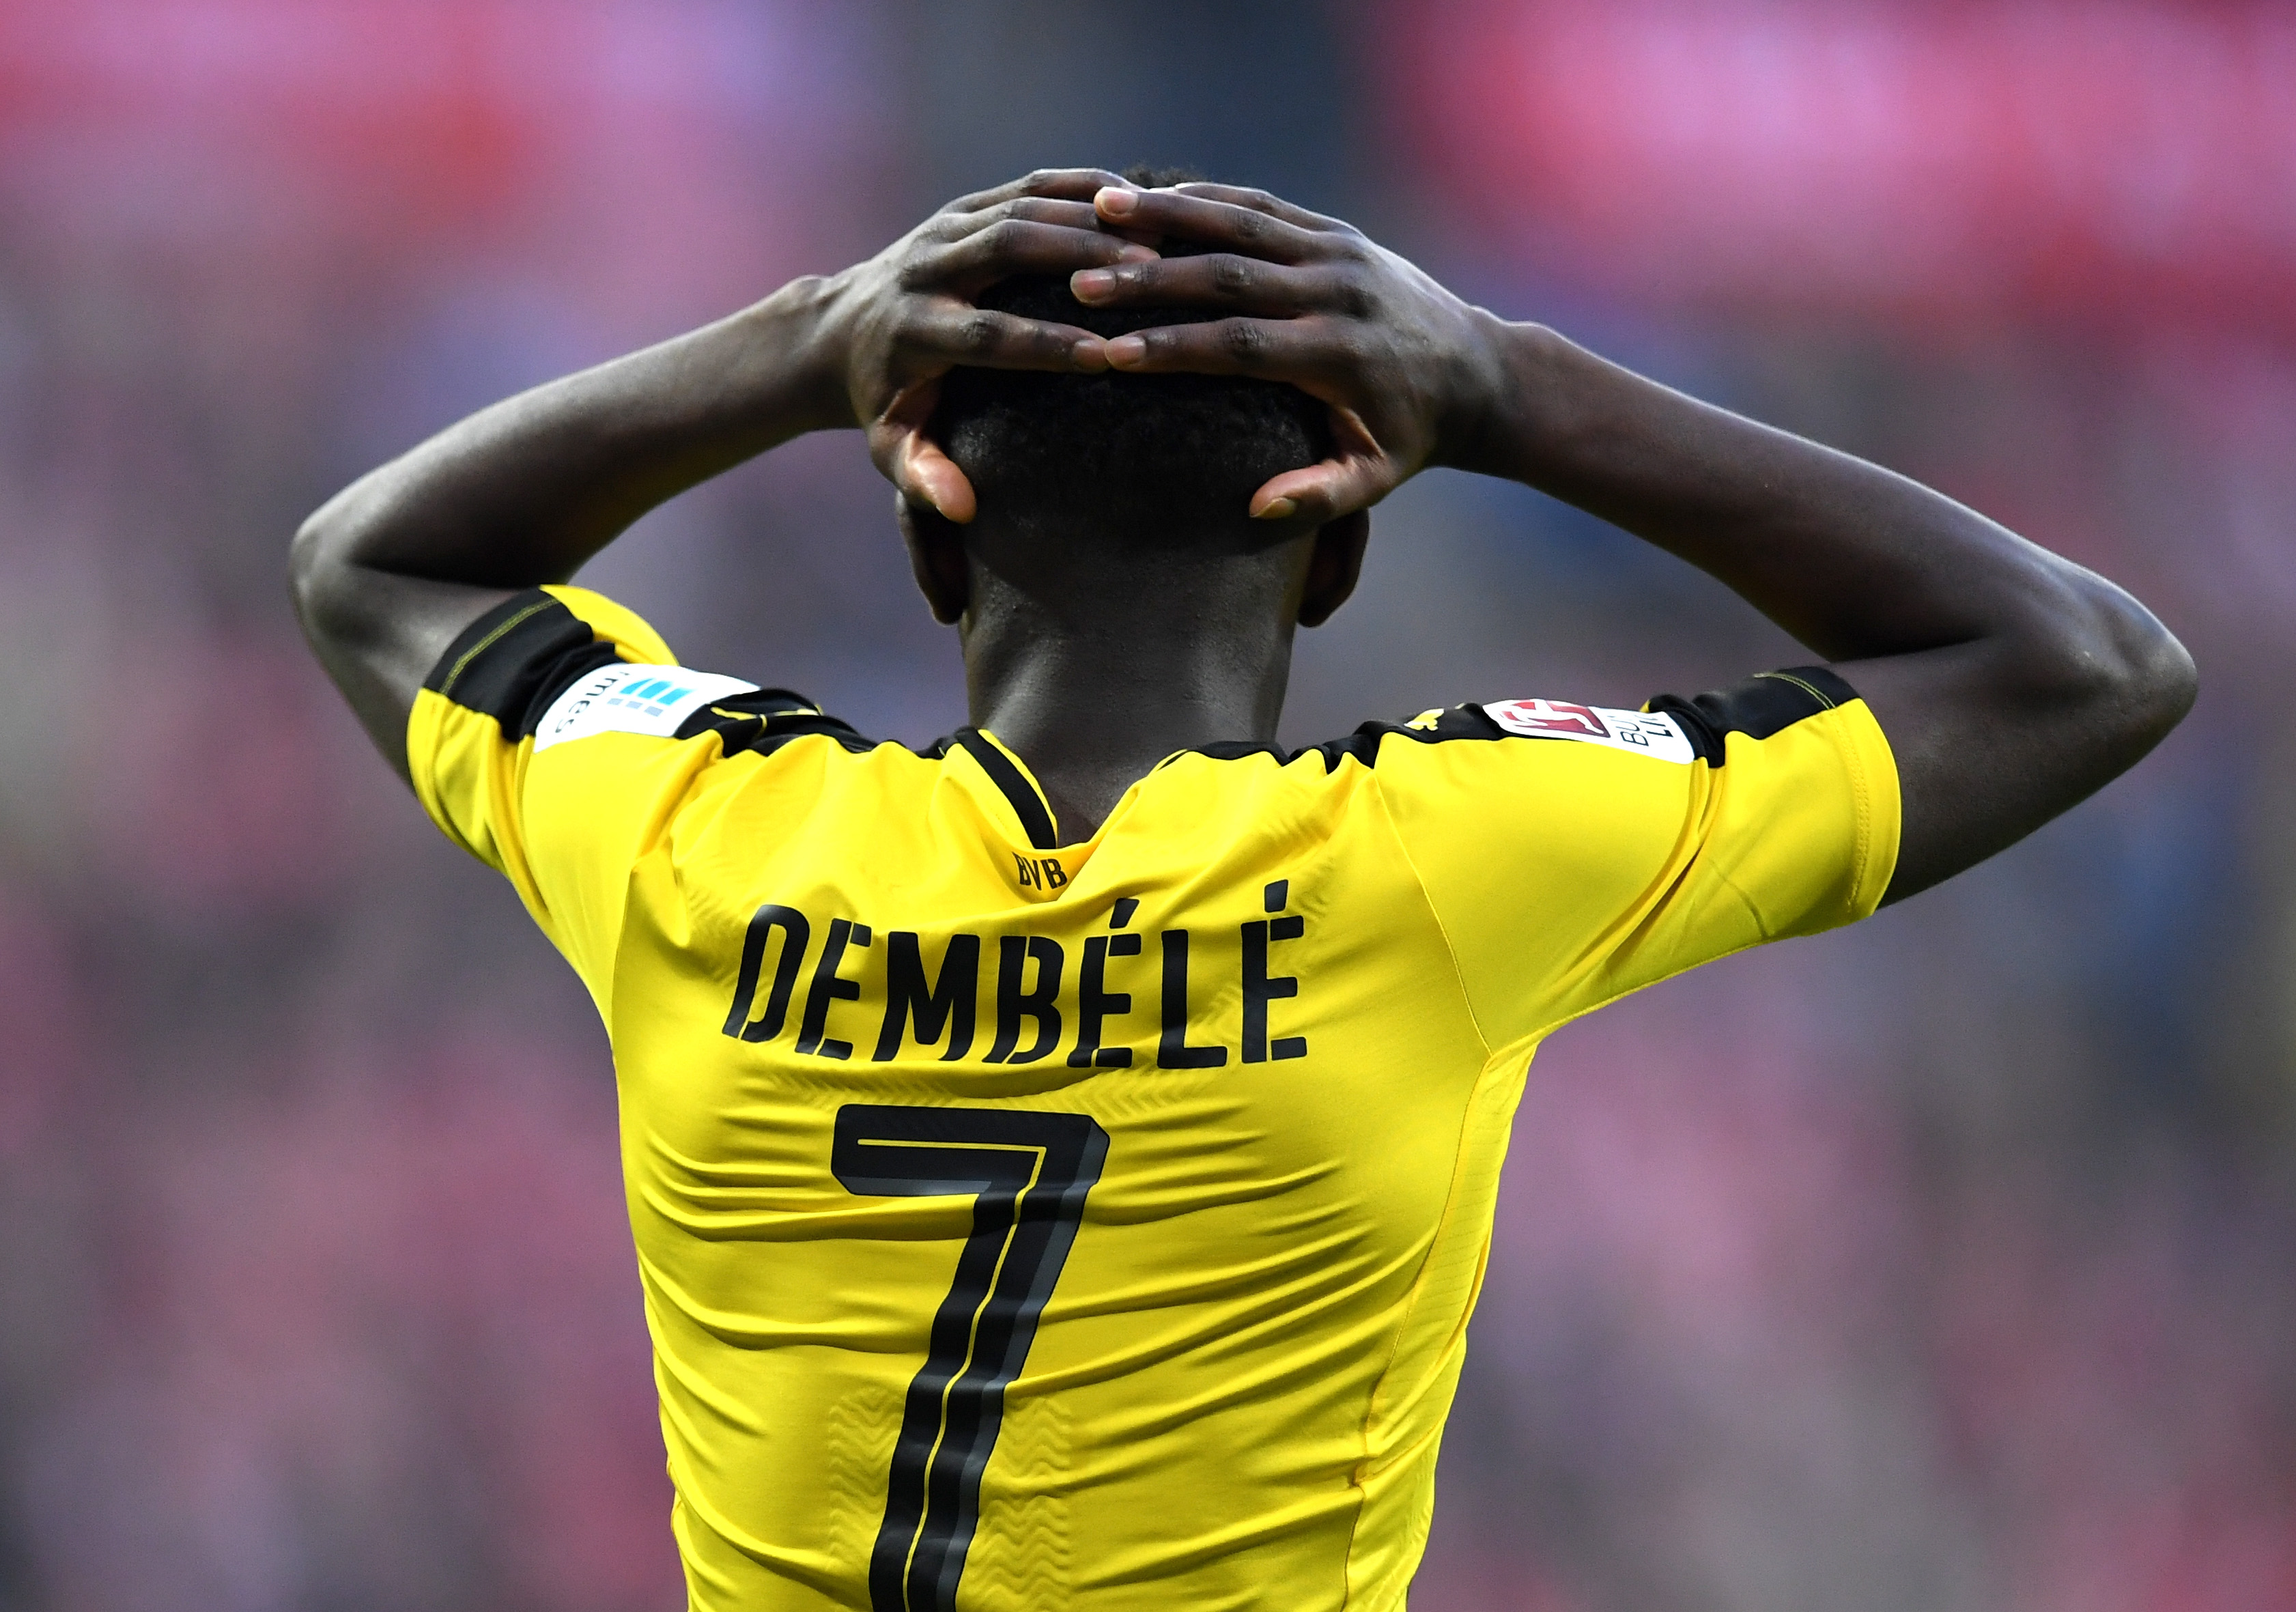 MUNICH, GERMANY - APRIL 08: Ousmane Dembele of Borussia Dortmund reacts during the Bundesliga match between Bayern Muenchen and Borussia Dortmund at Allianz Arena on April 8, 2017 in Munich, Germany.  (Photo by Matthias Hangst/Bongarts/Getty Images)